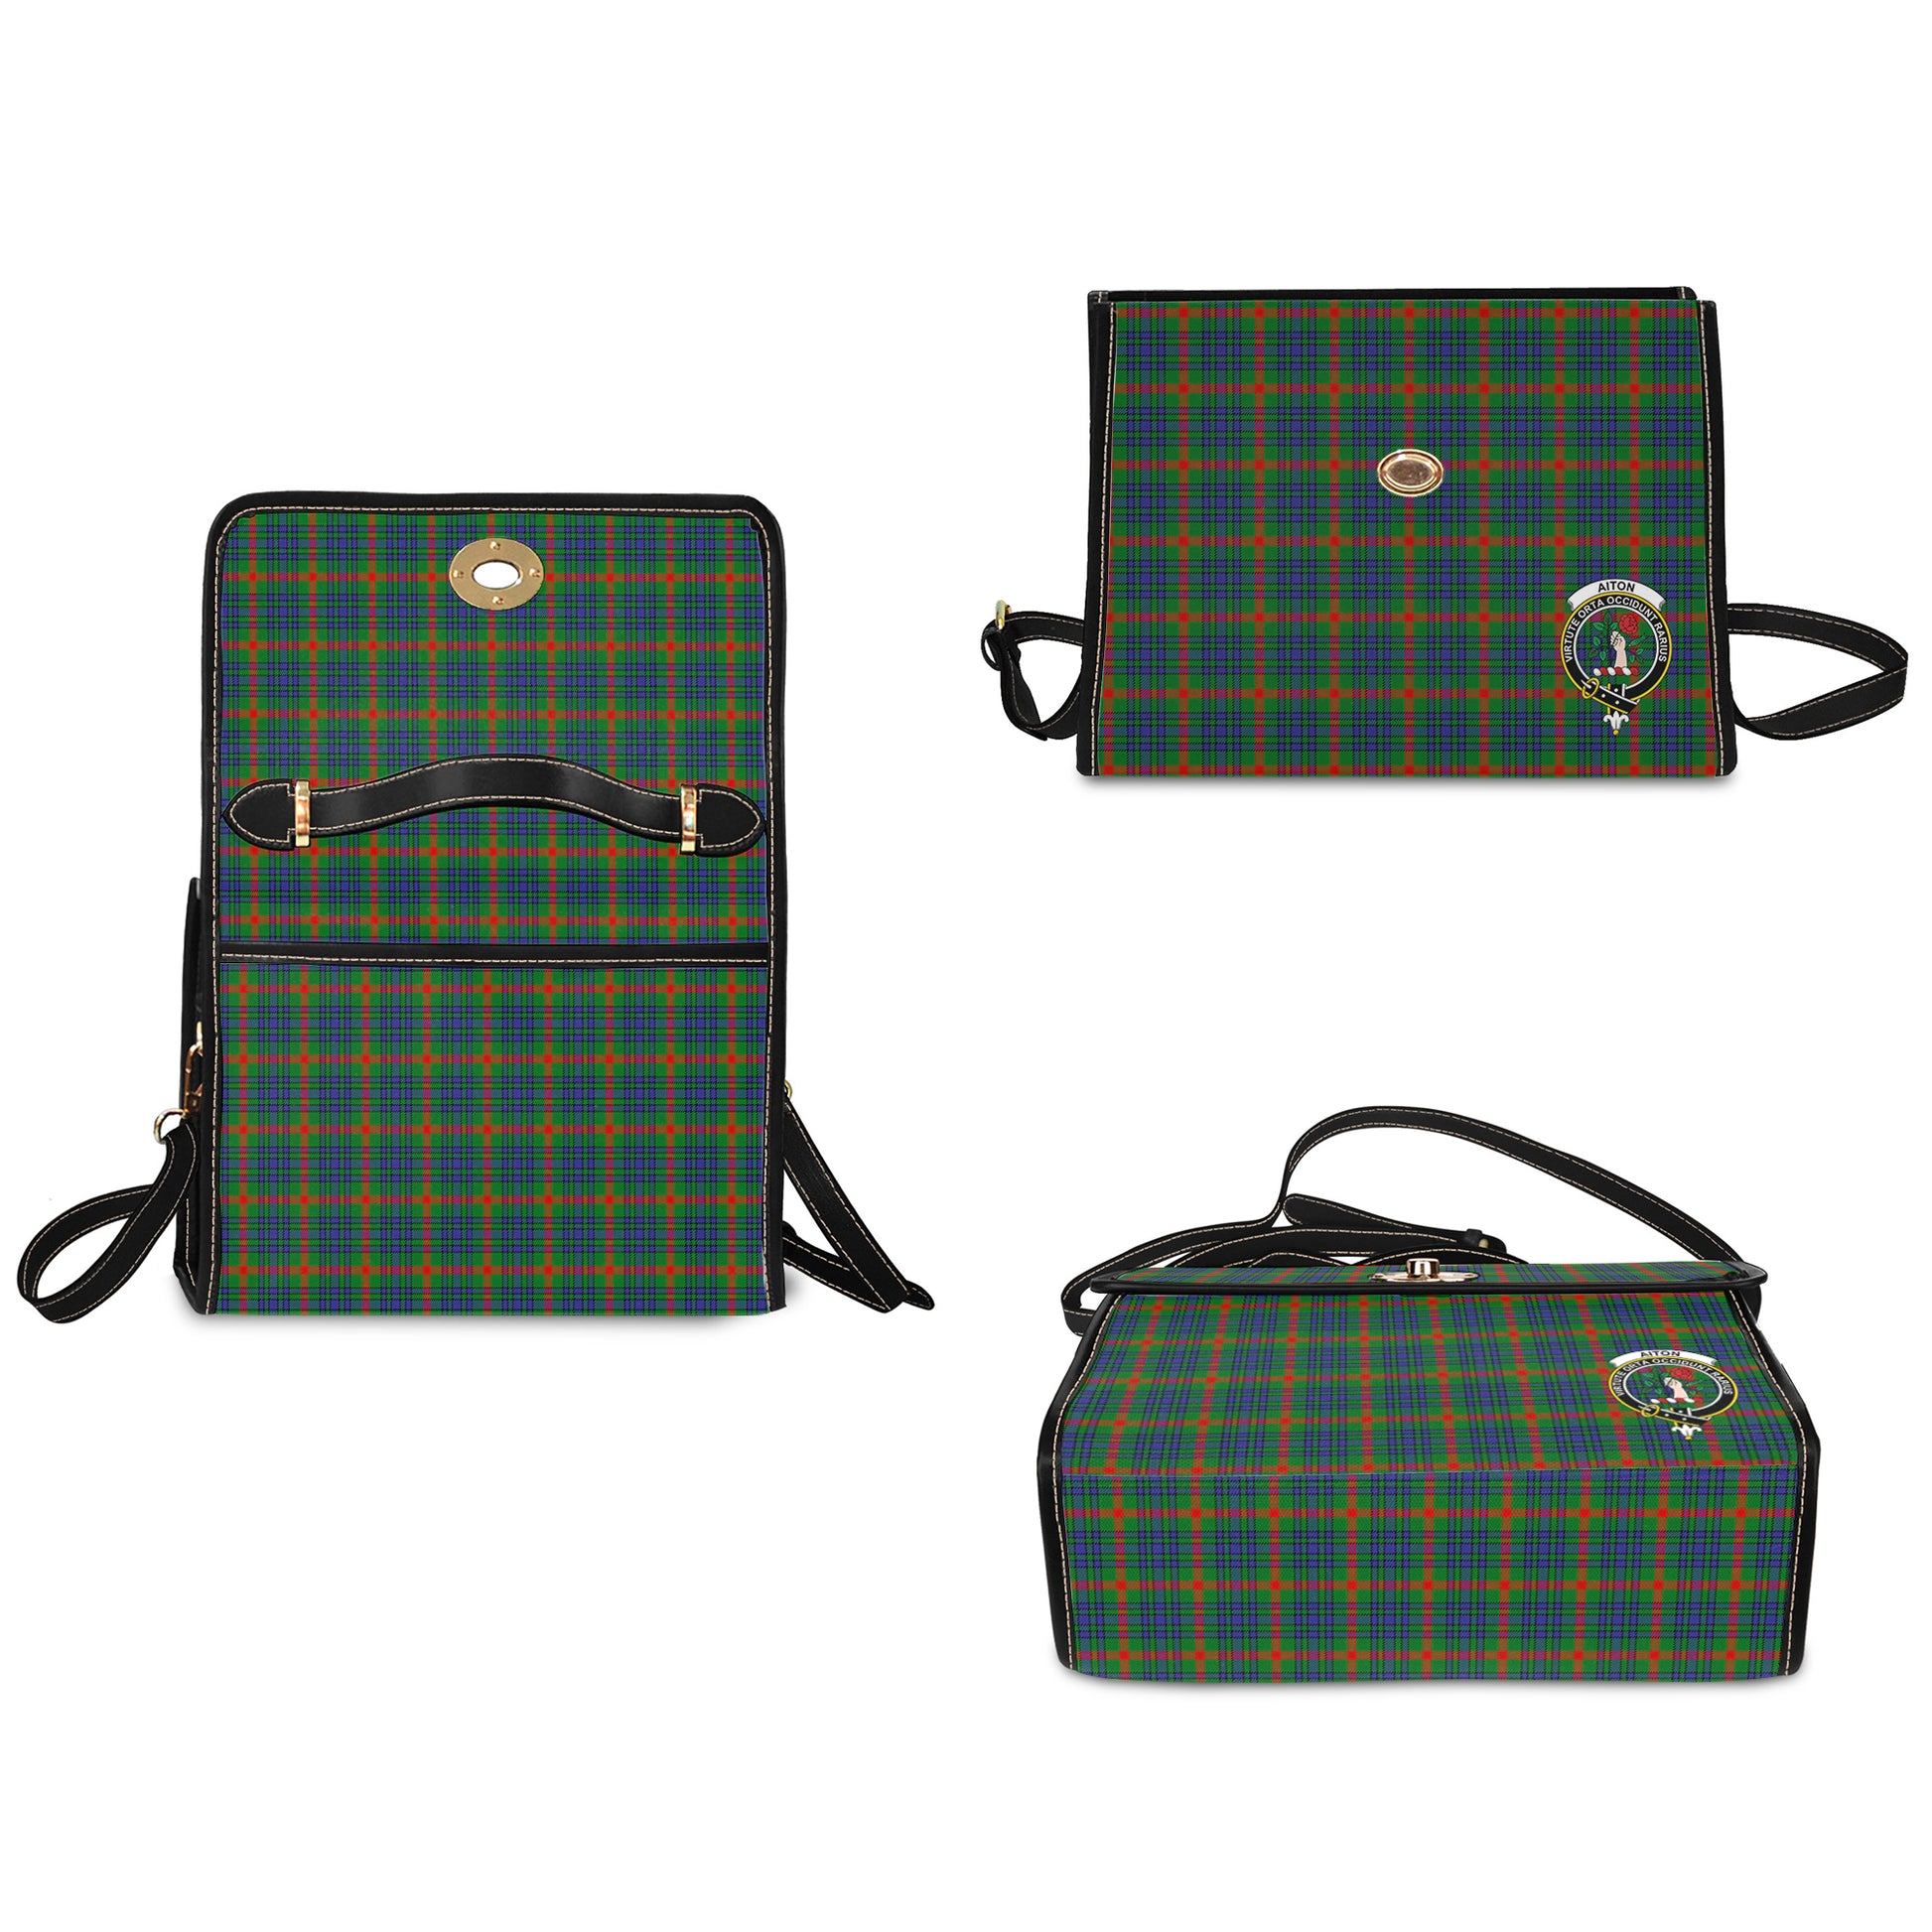 Aiton Tartan Leather Strap Waterproof Canvas Bag with Family Crest - Tartanvibesclothing